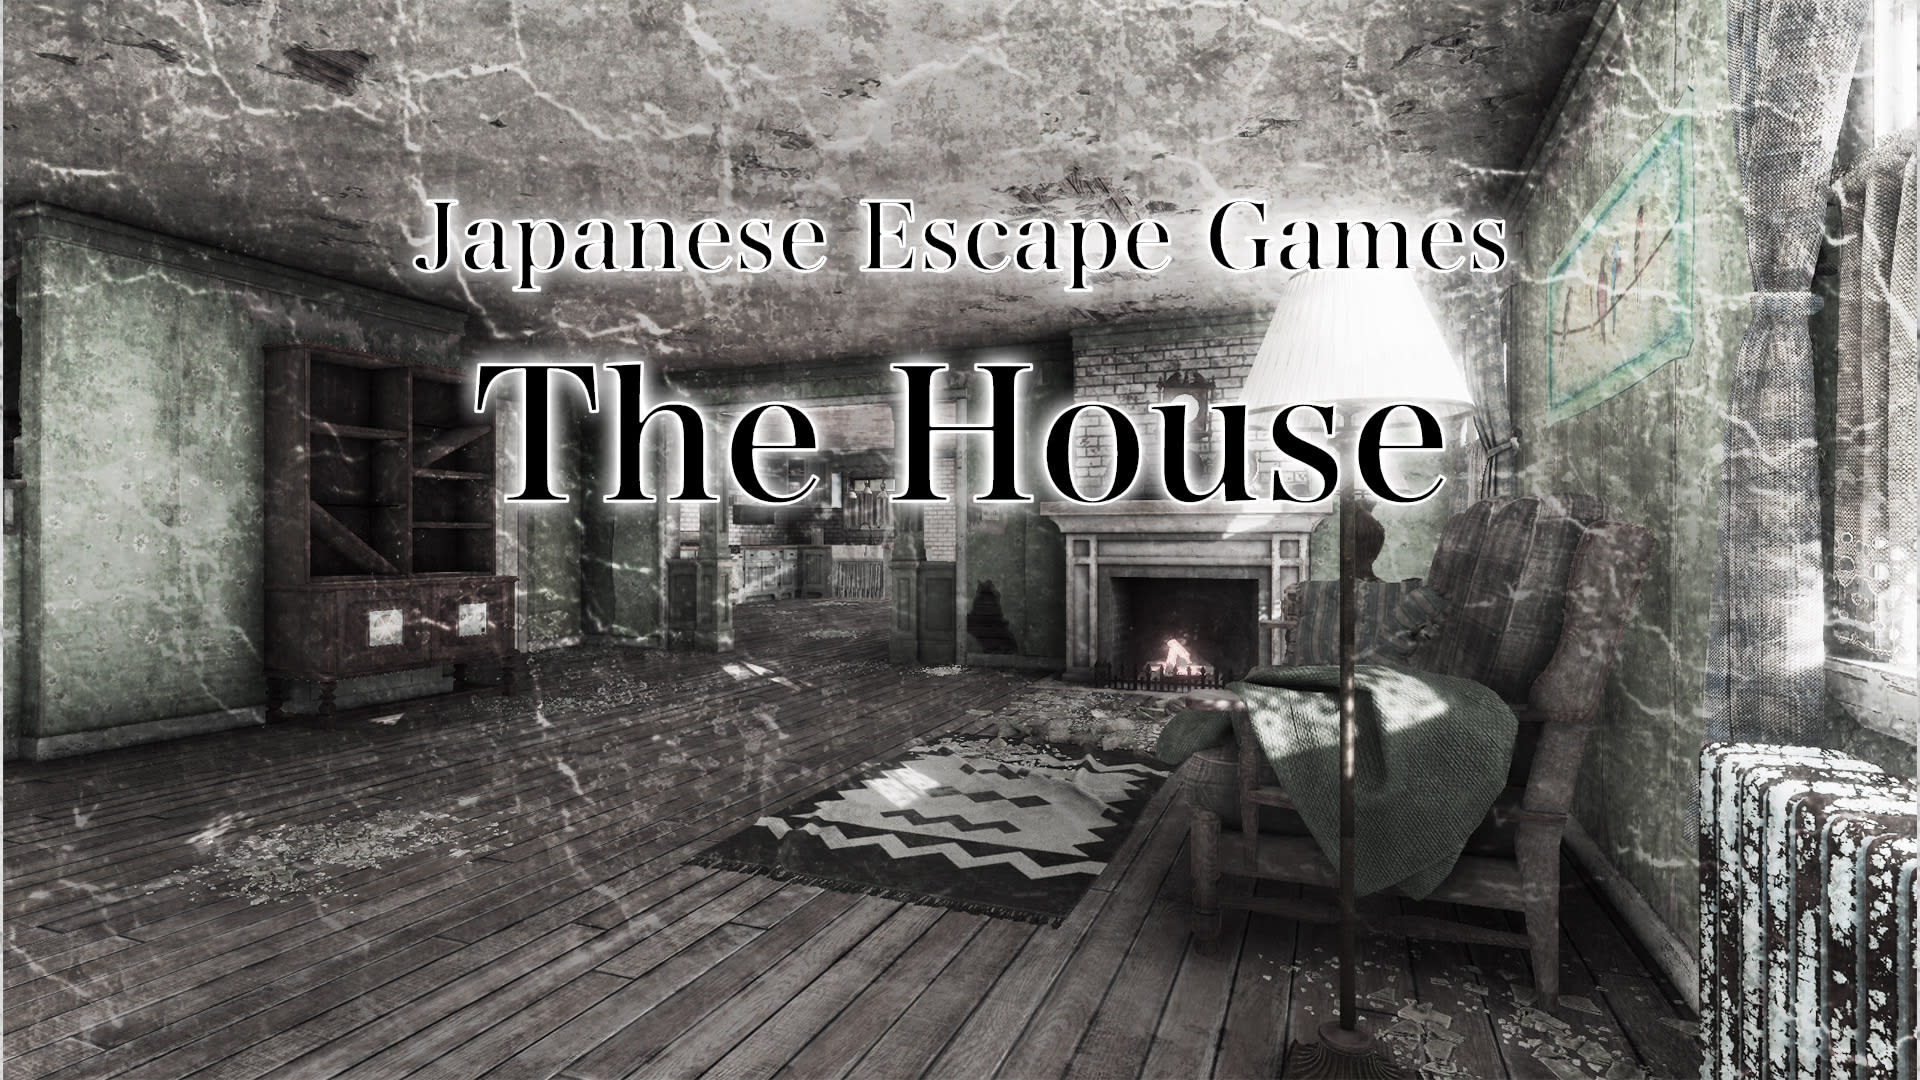 Japanese Escape Games The House